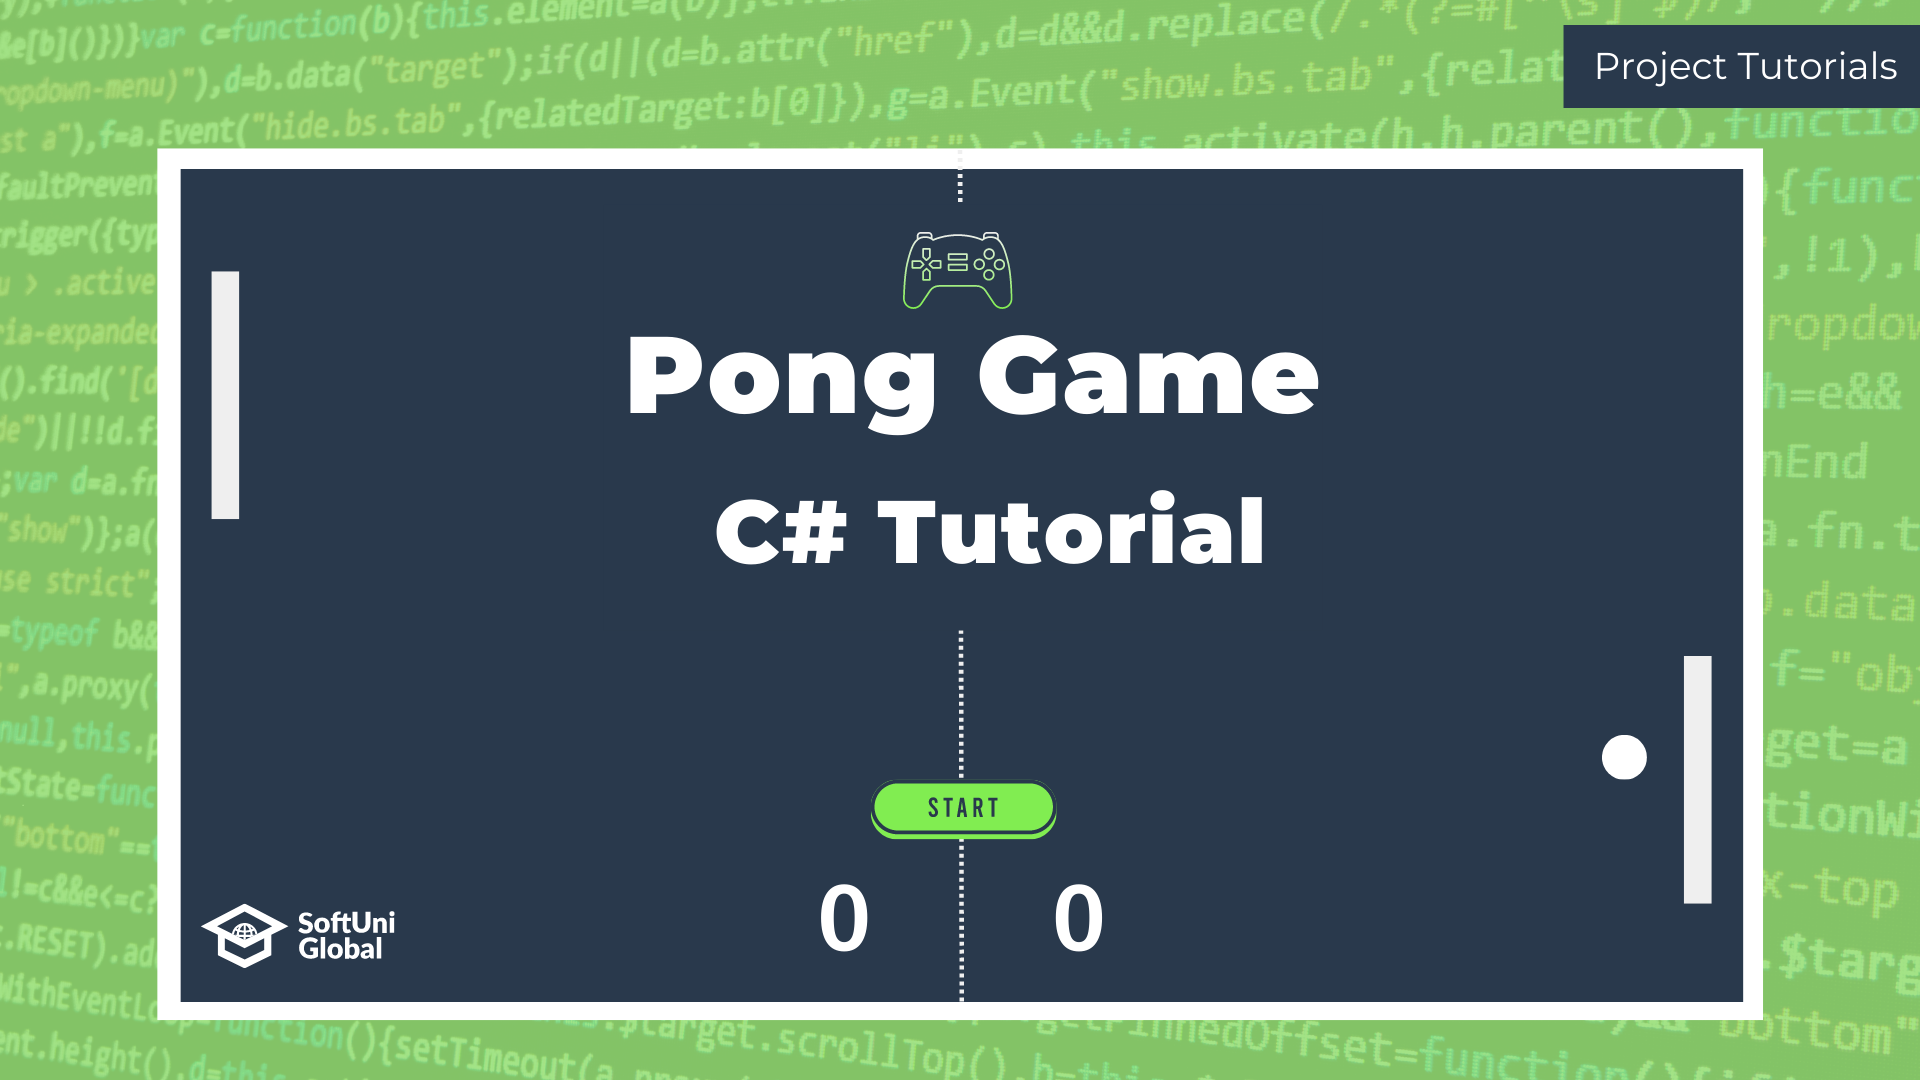 Pong-Game-Featured-Image